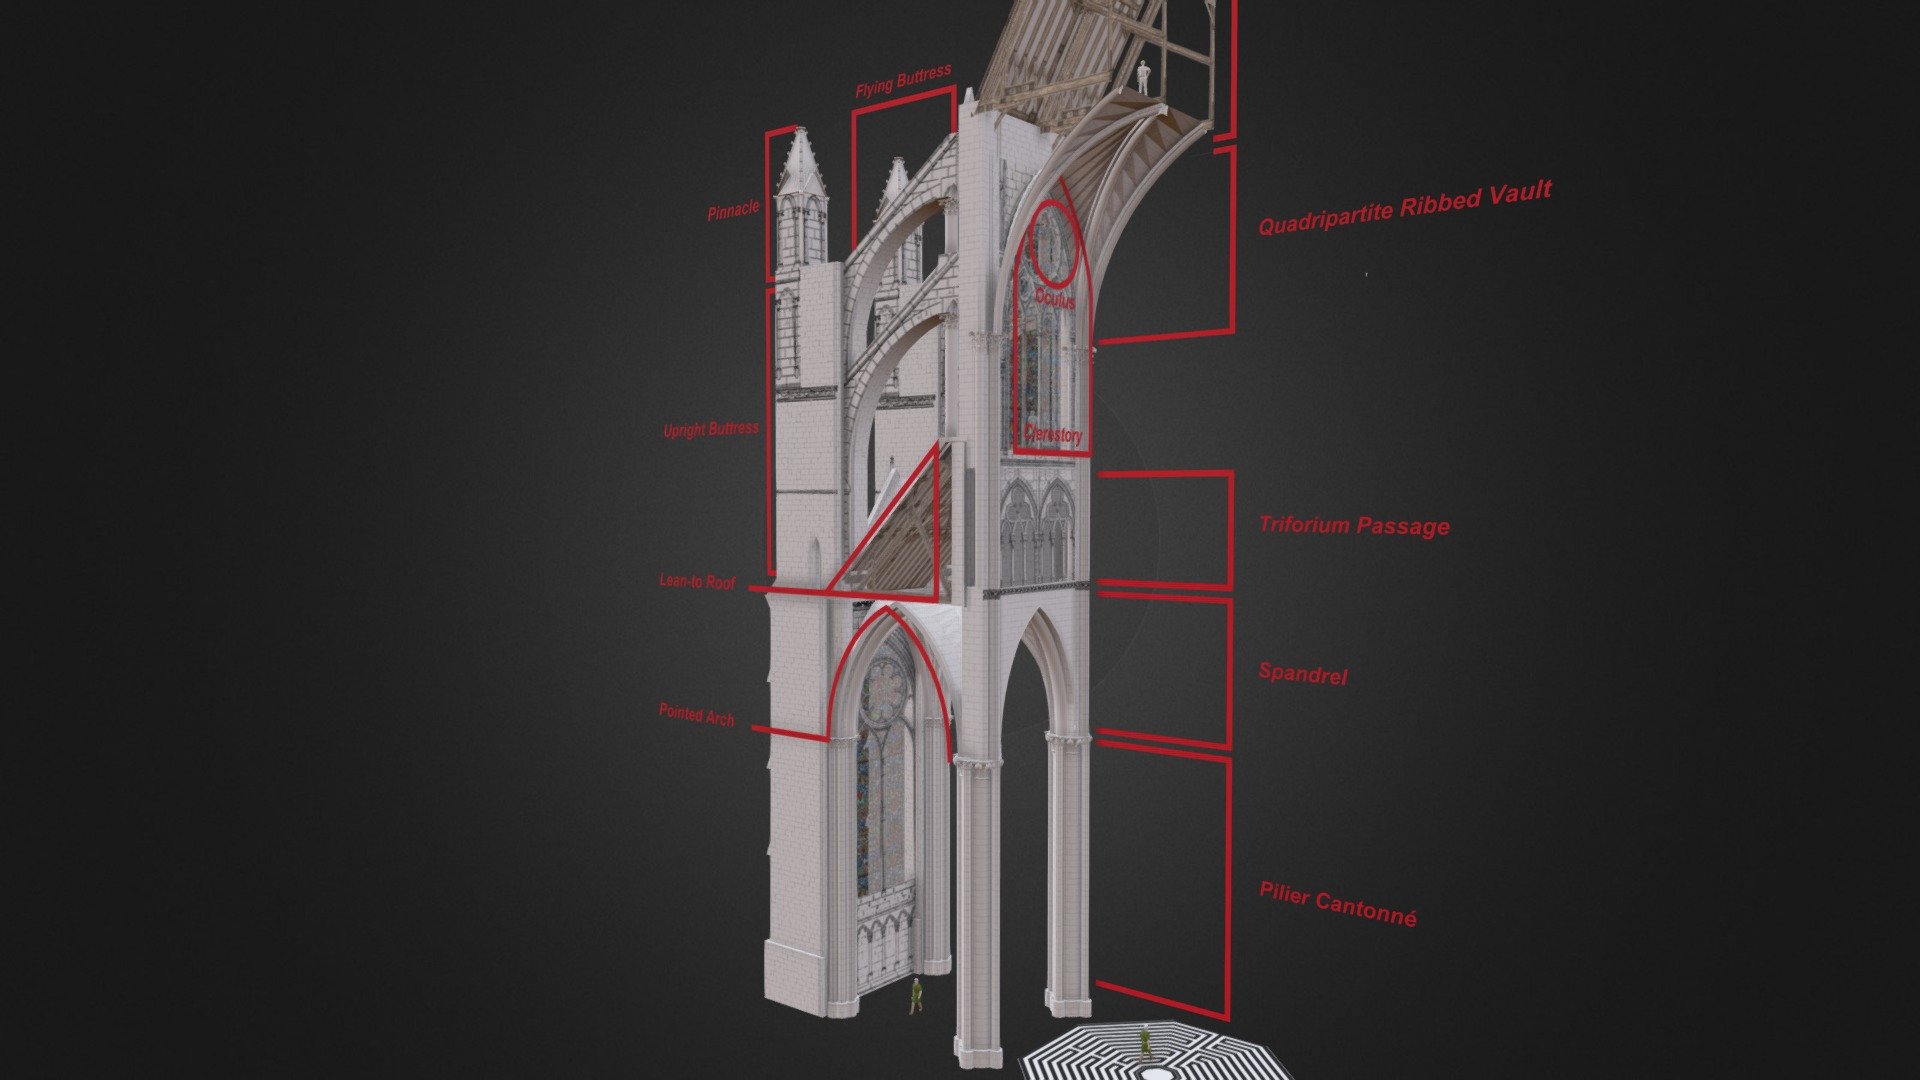 Download includes source files in SKP and KMZ formats.

Click annotations for details about individual components of structure.

Learn more about gothic cathedrals with this interactive glossary from Columbia University - Animated Glossary of a Gothic Cathedral - Buy Royalty Free 3D model by Myles Zhang (@mdzhang) 3d model